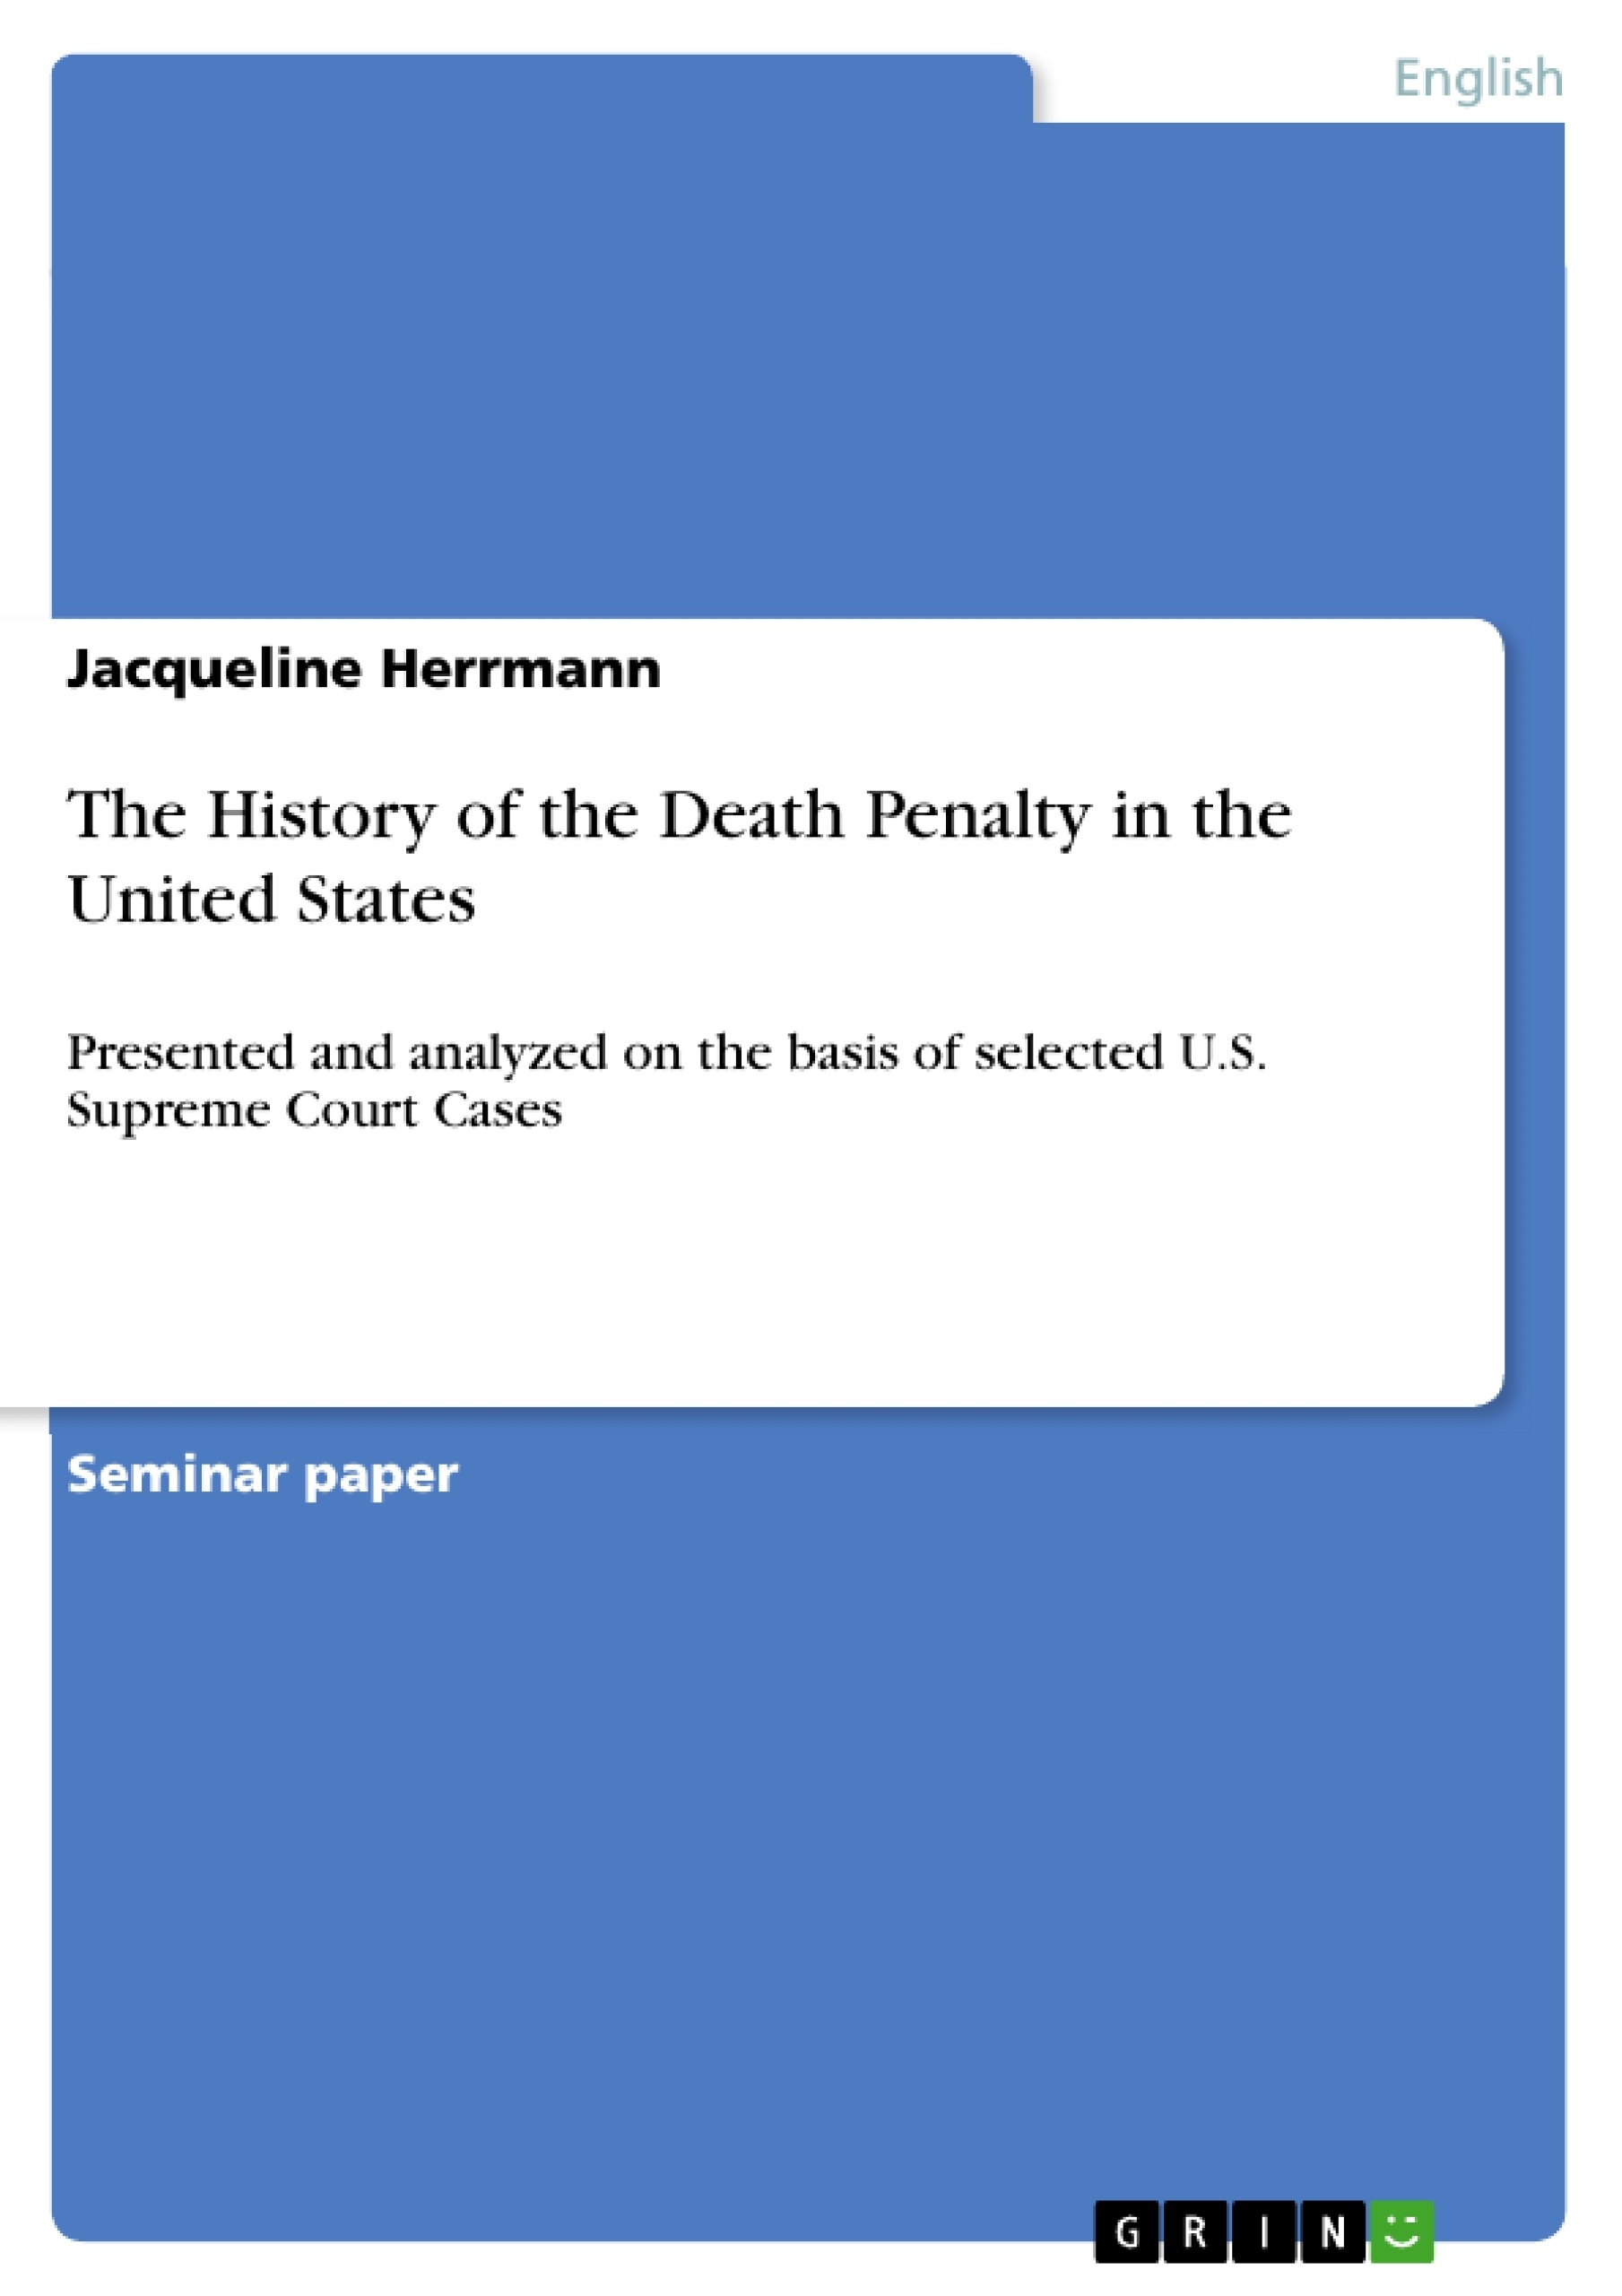 Title: The History of the Death Penalty in the United States